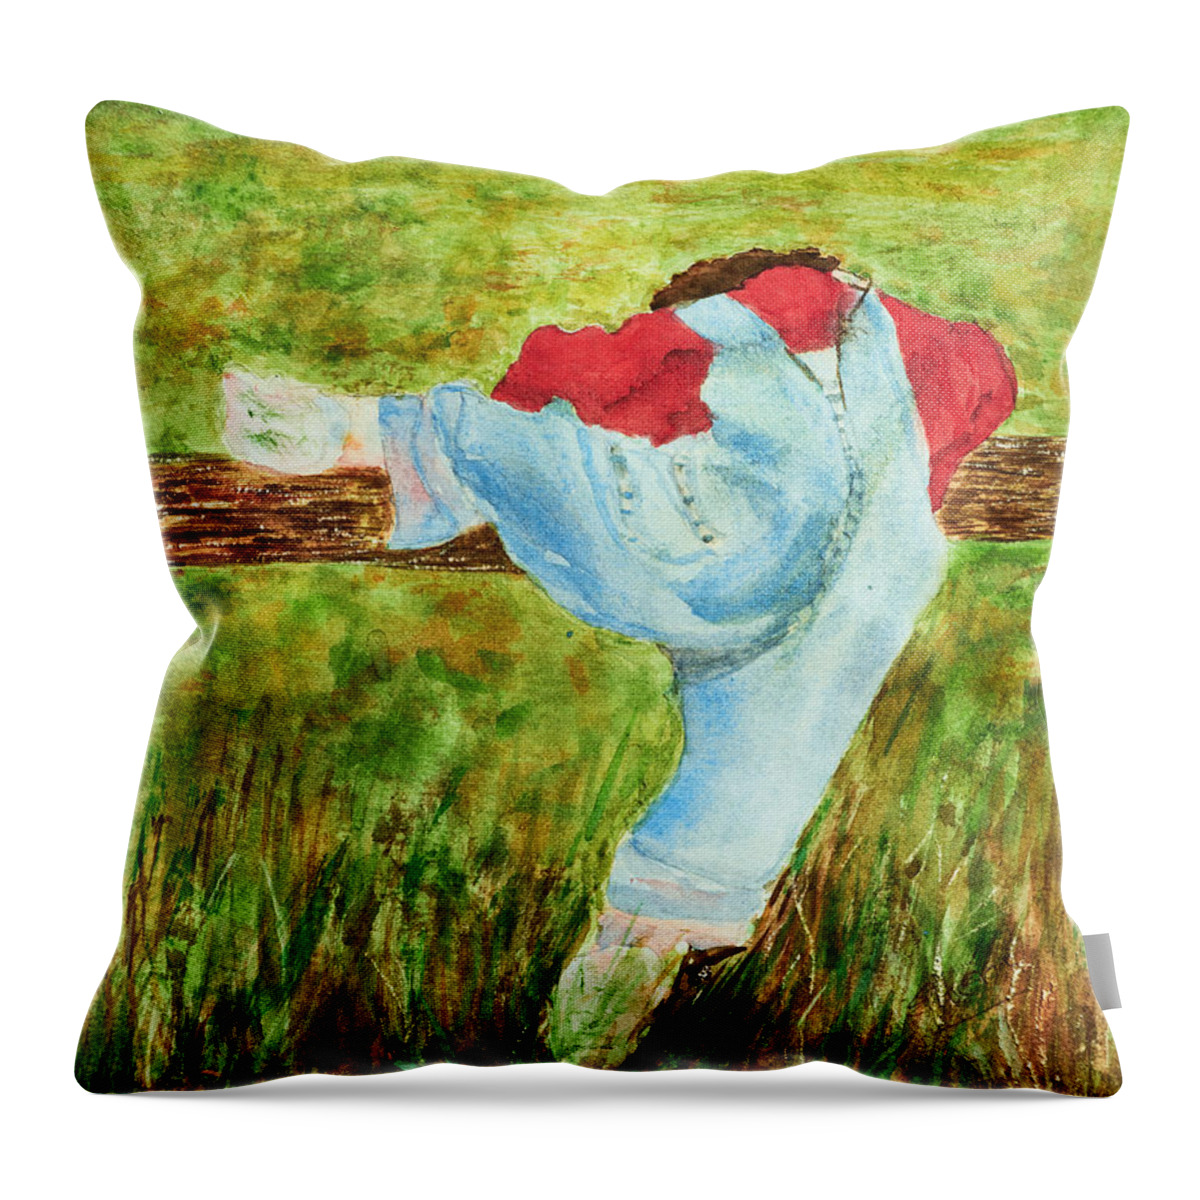 Art - Watercolor Throw Pillow featuring the painting Hide and Seek Watercolor painting by Sher Nasser